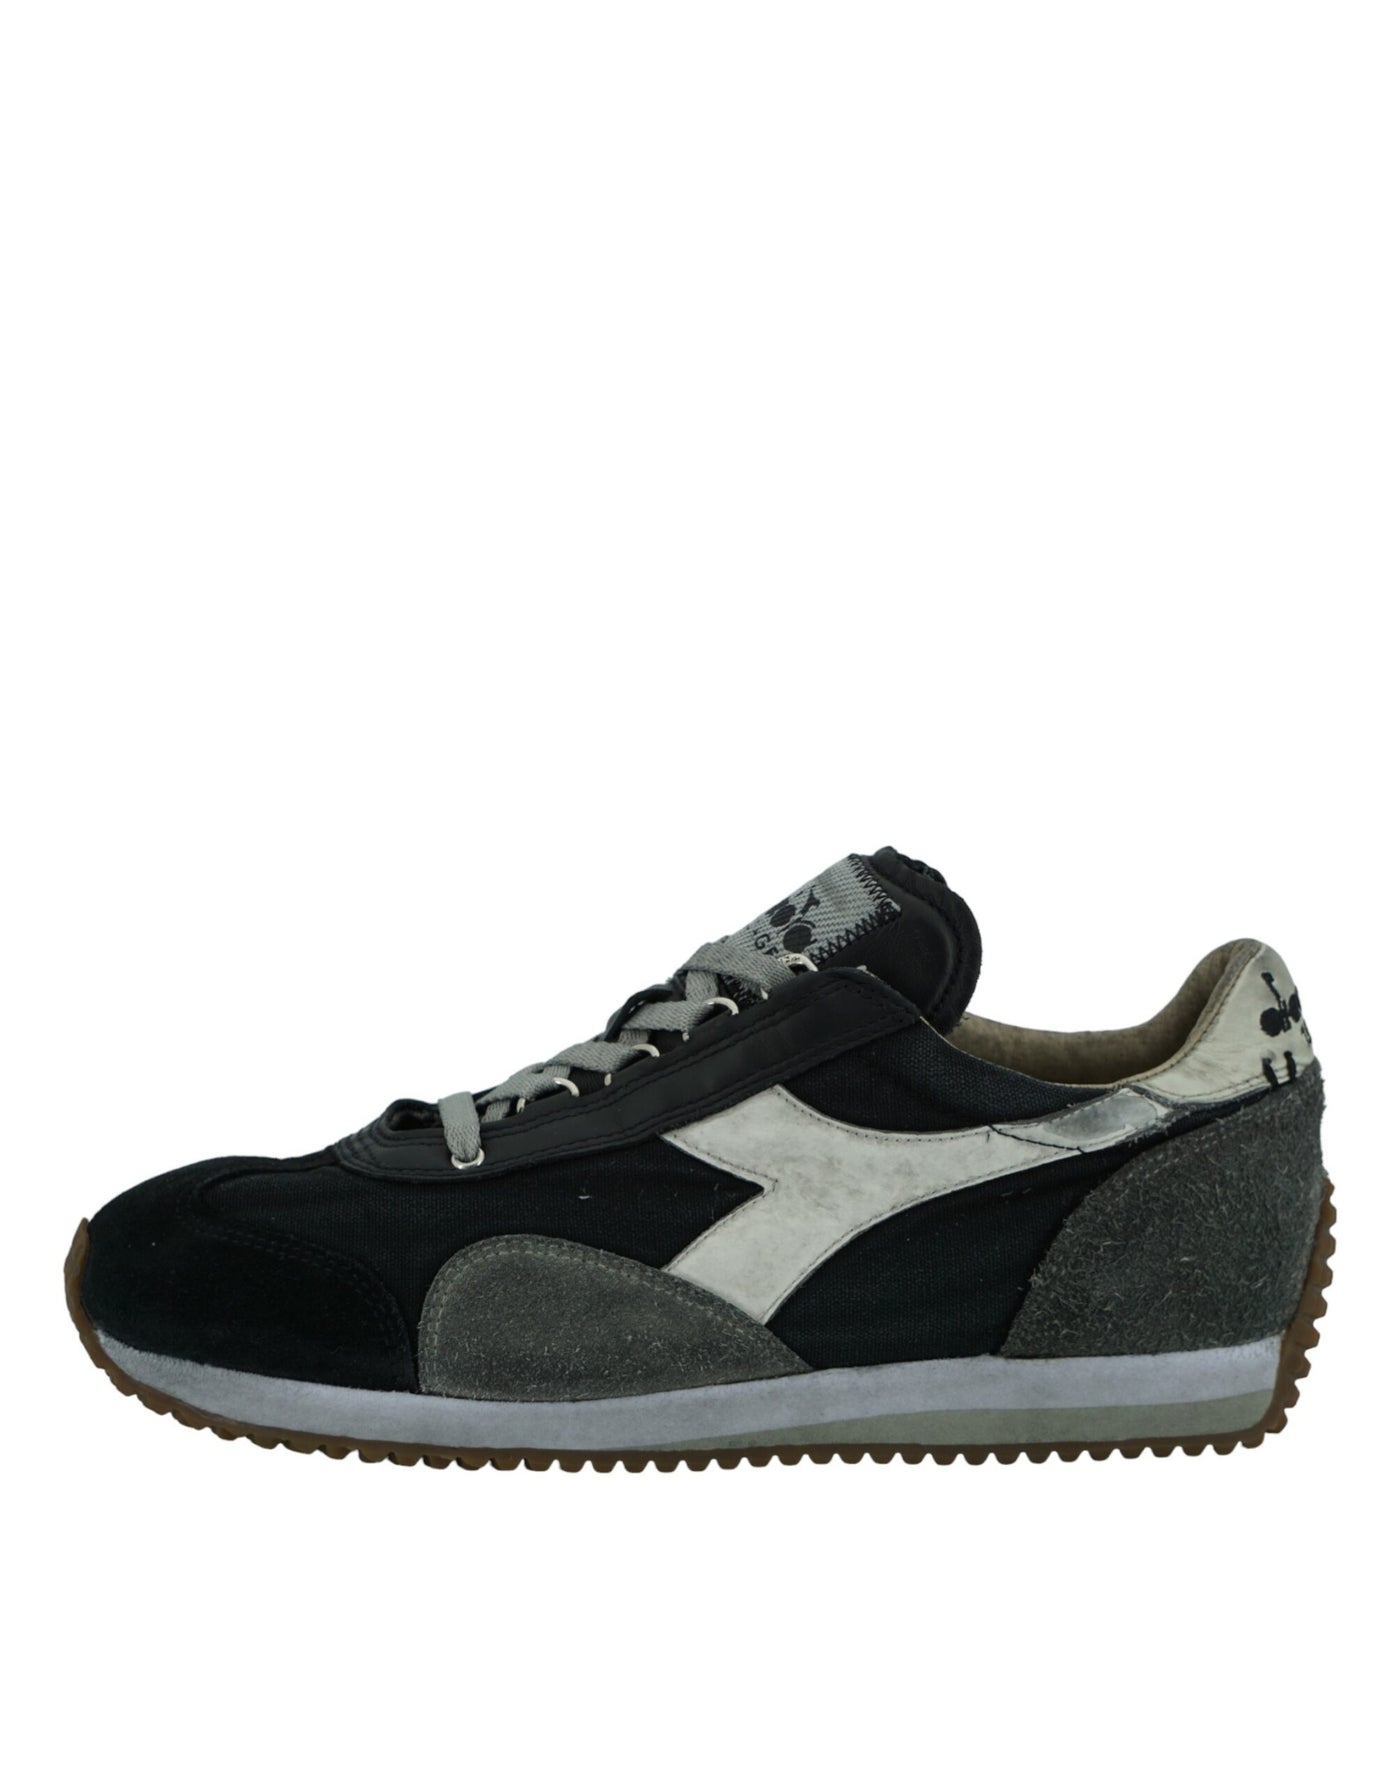 Diadora Equipe H Dirty Stone Leather Sneakers